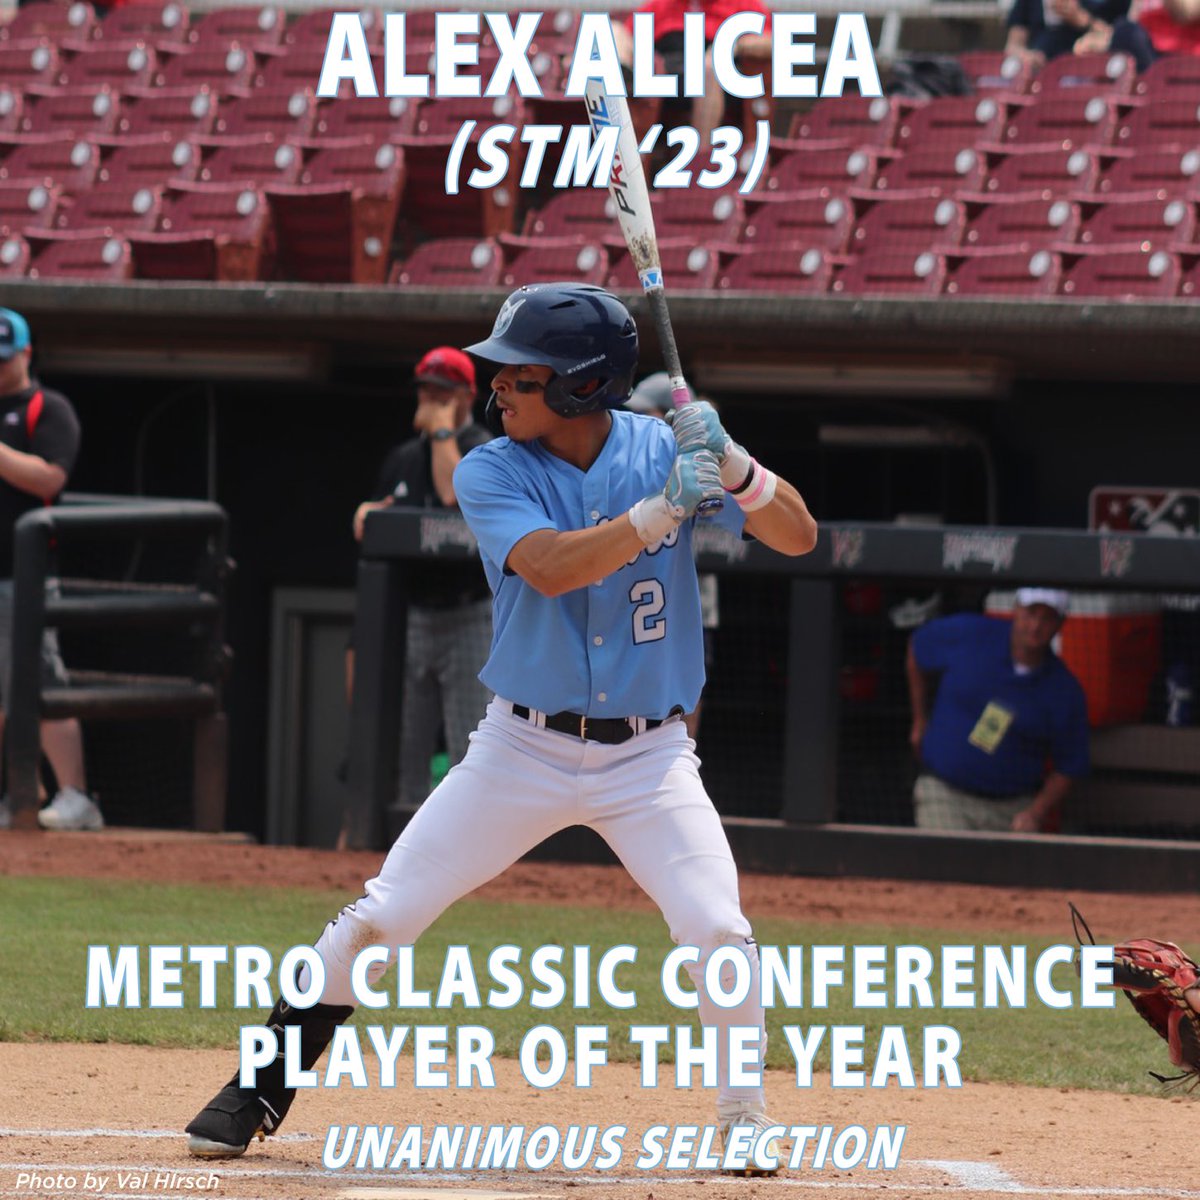 Congrats to Senior Alex Alicea on his unanimous selection as the 2023 Metro Classic Conference Player of the year. A terrific recognition of his amazing season…way to go Alex!